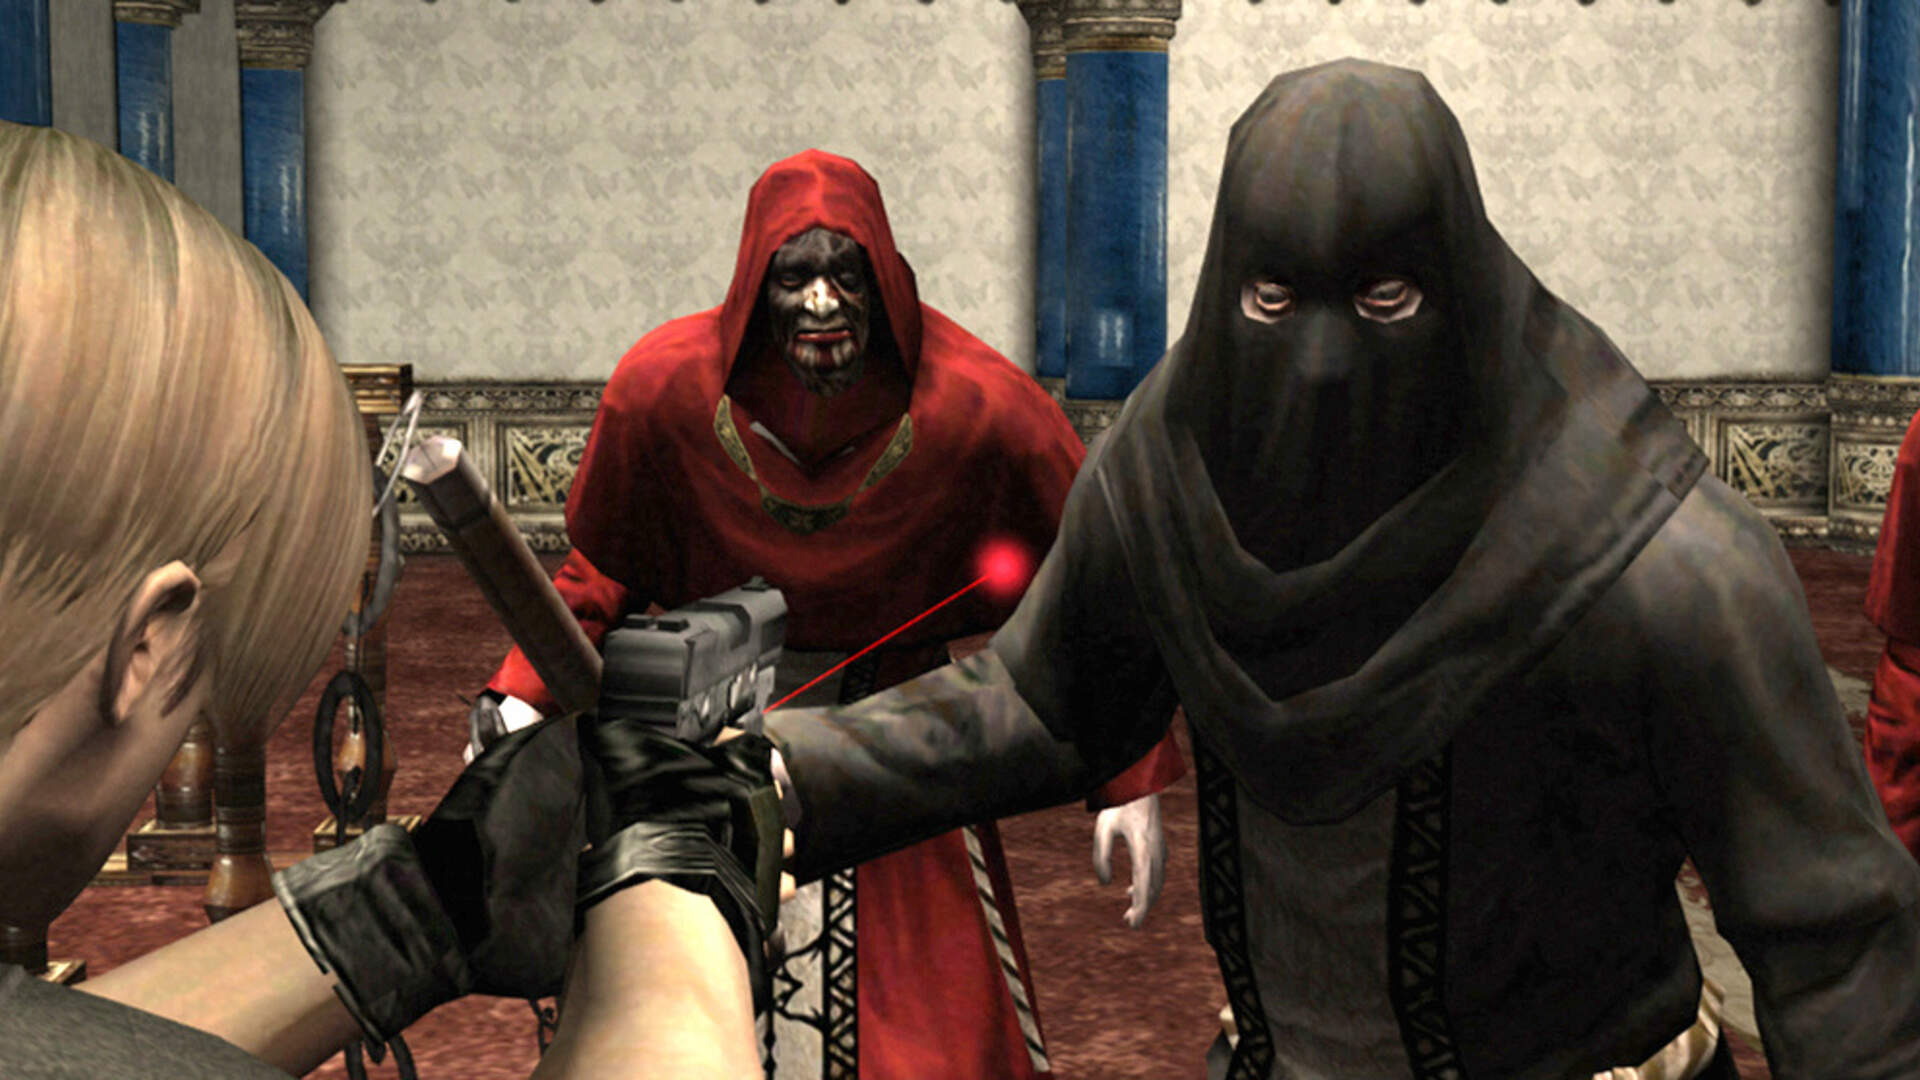 Steam resident evil 4 ultimate hd фото 47